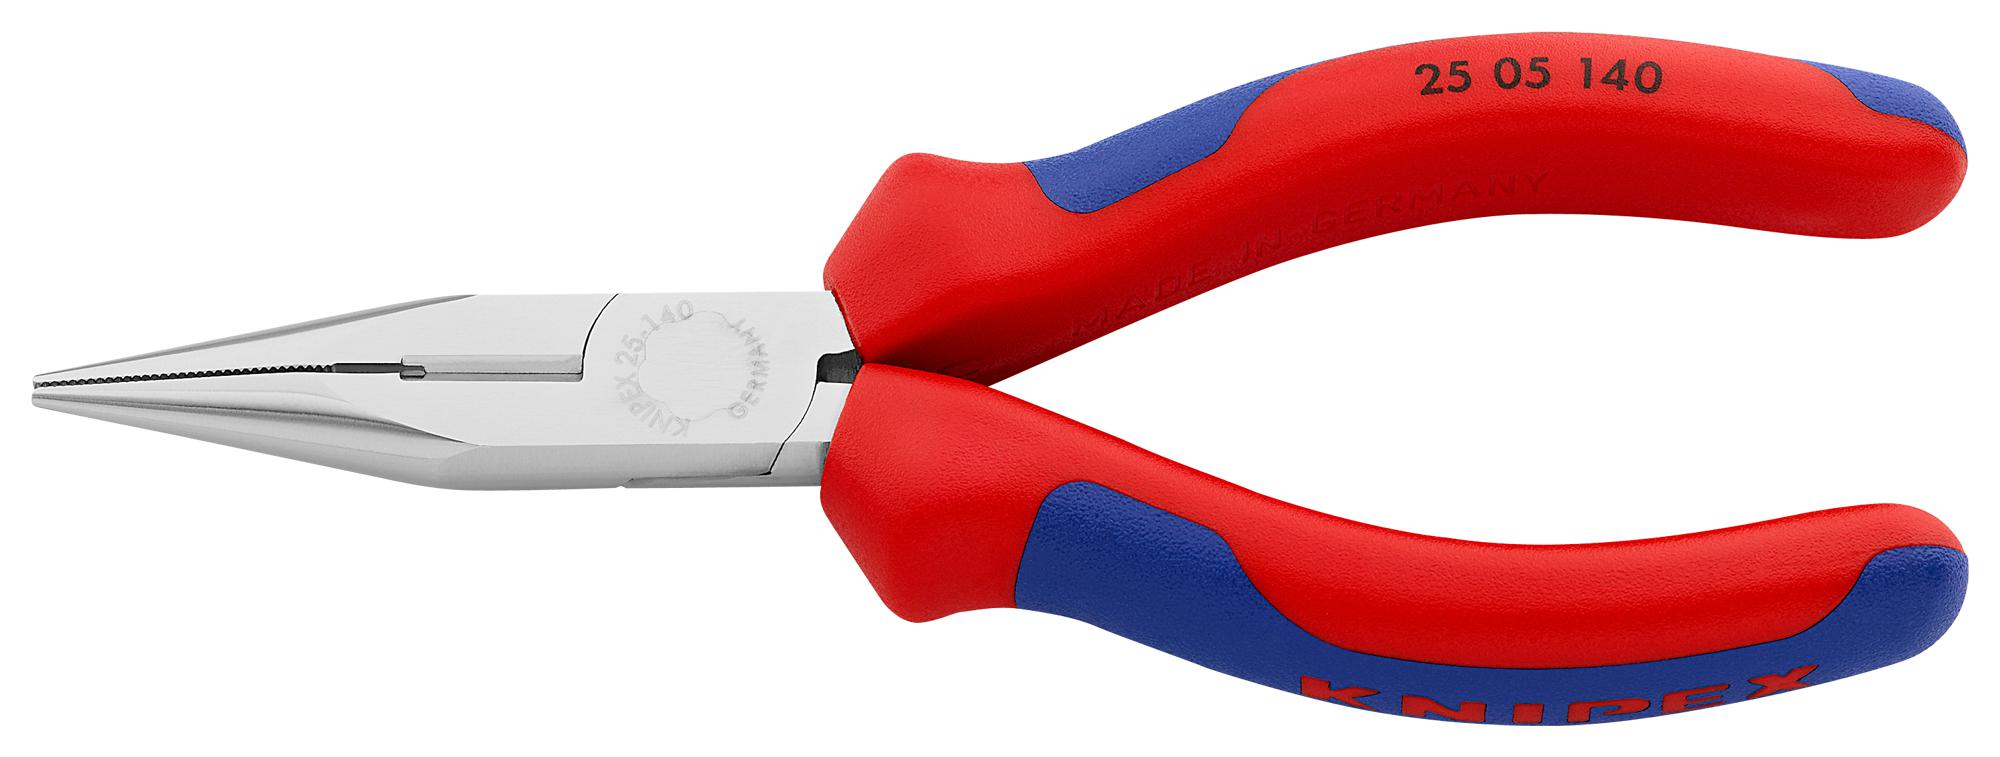 25 05 140 COMBINATION PLIER, 140MM KNIPEX